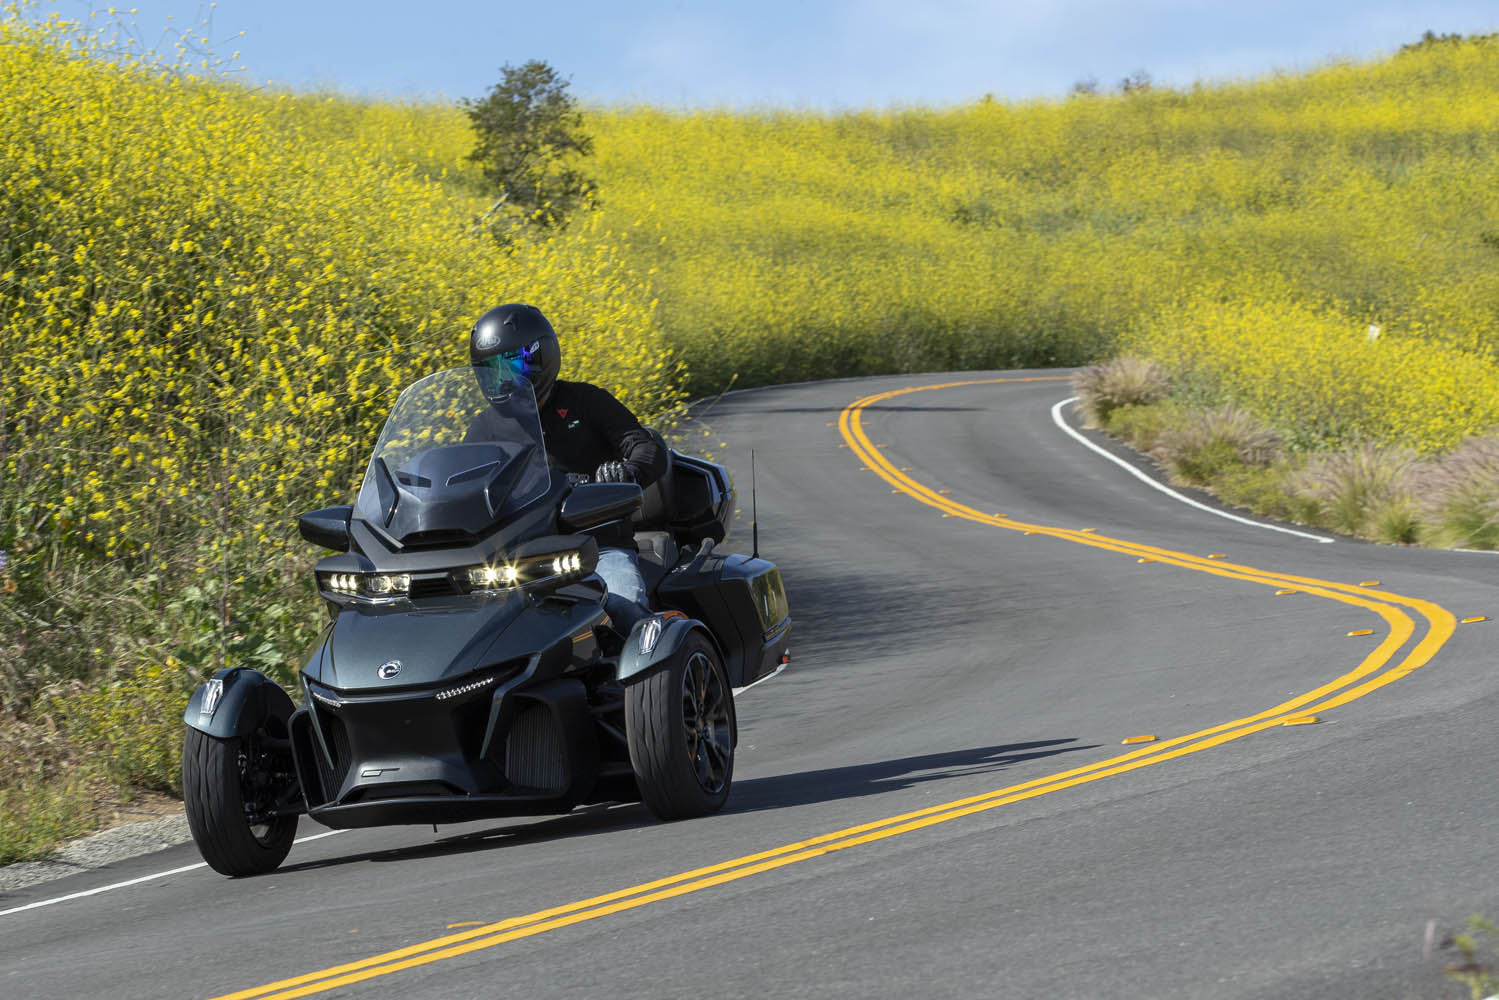 2022 Can-Am Spyder RT Limited, Road Test Review